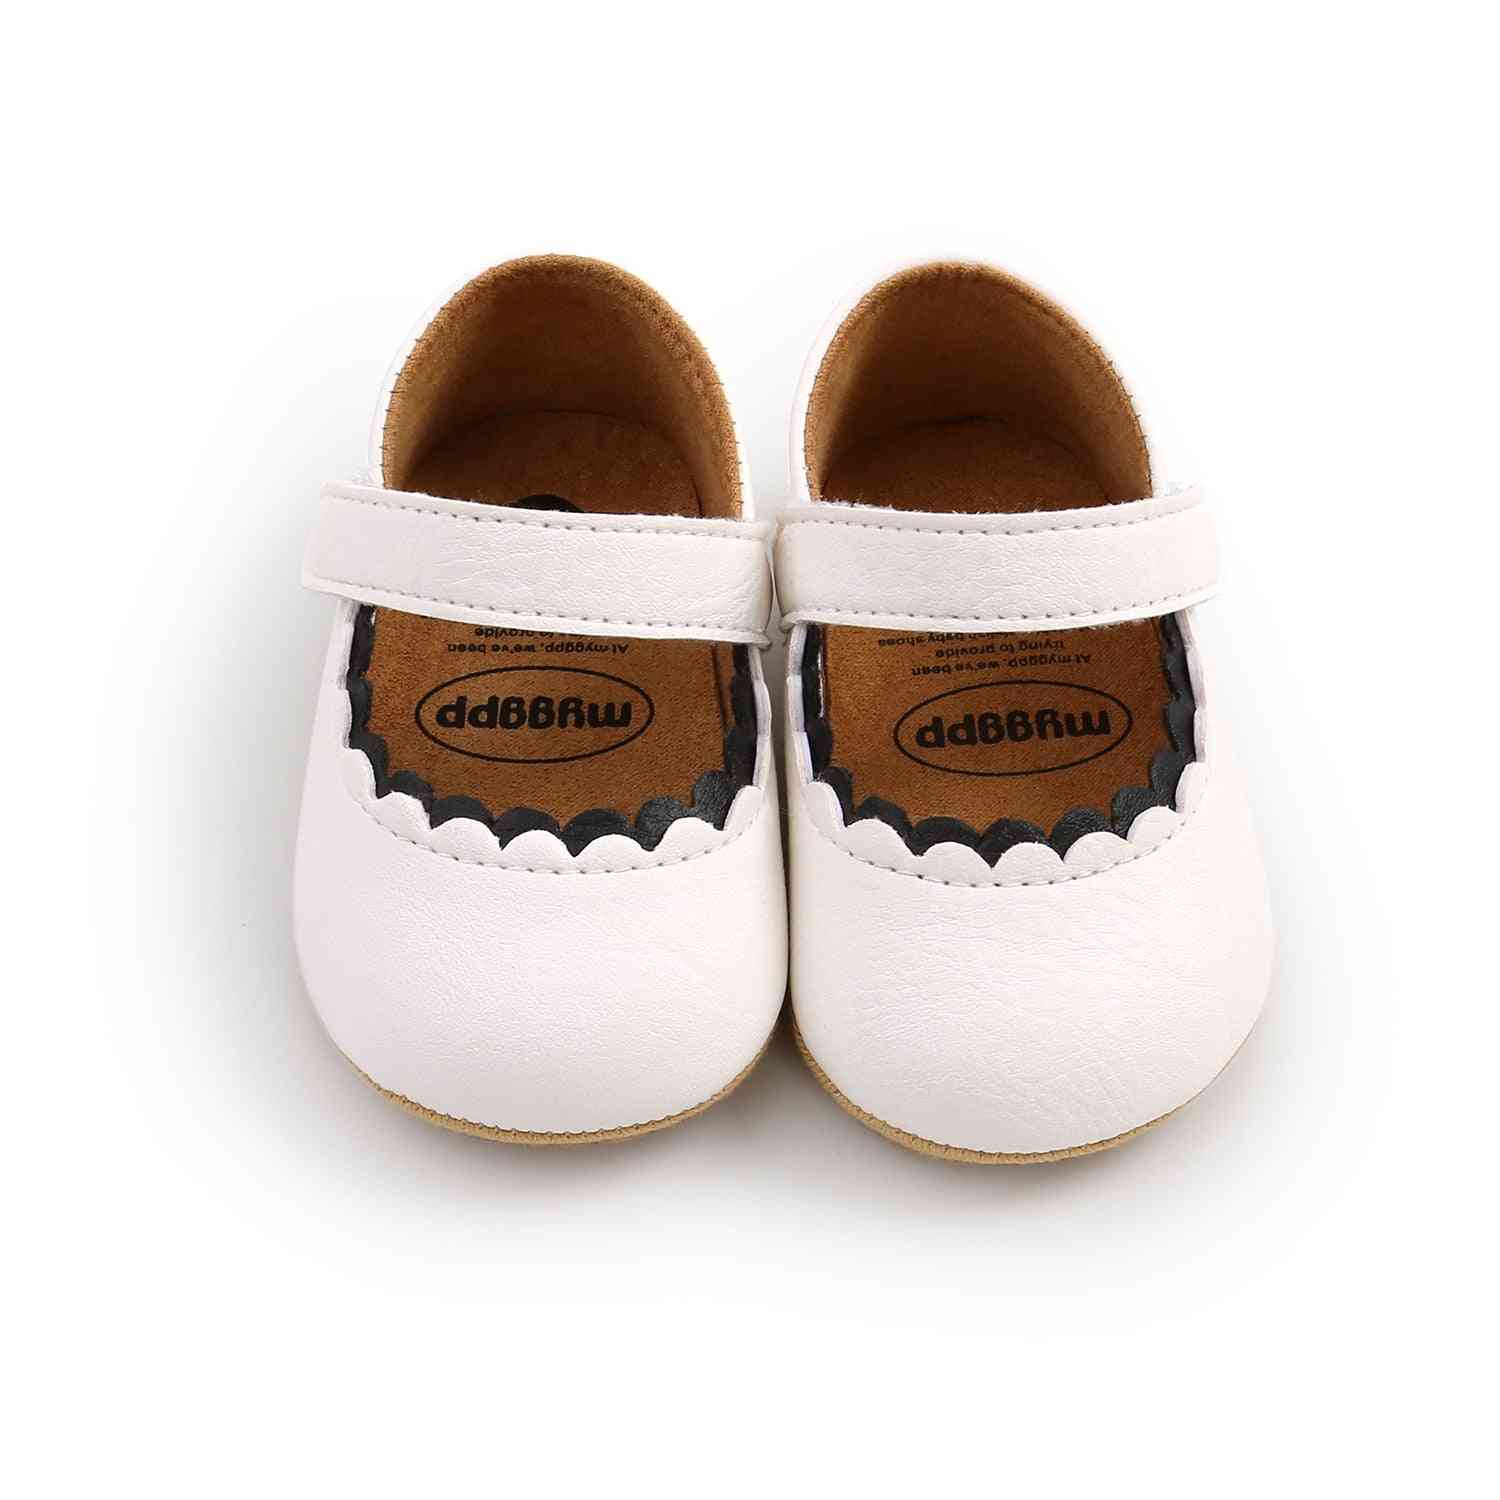 Baby Pu Leather Newborn Shoes, First Walkers